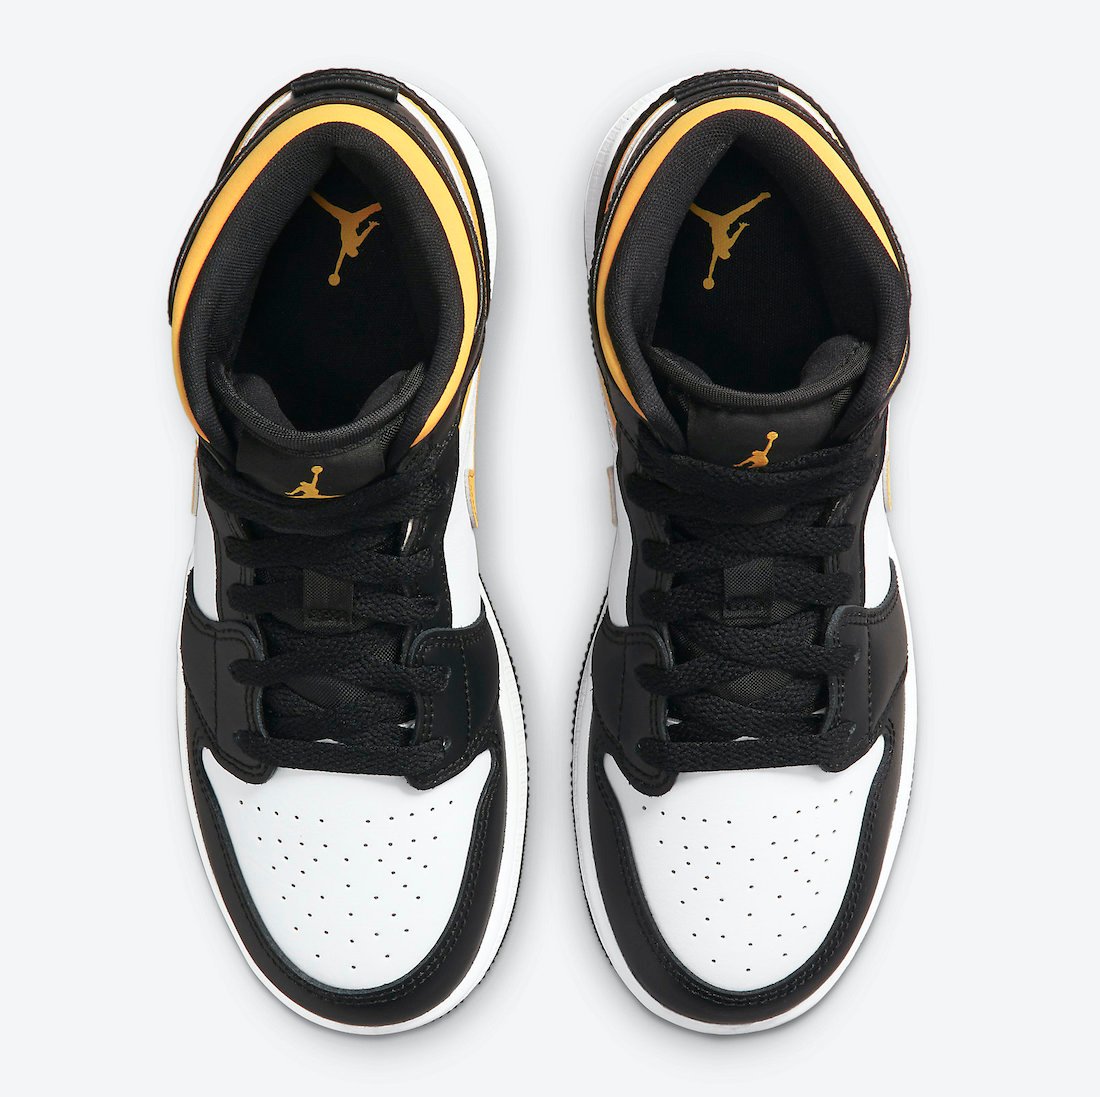 Air Jordan 1 Shadow Grey from Mid GS White Black Yellow 554725-177 Release Date Info